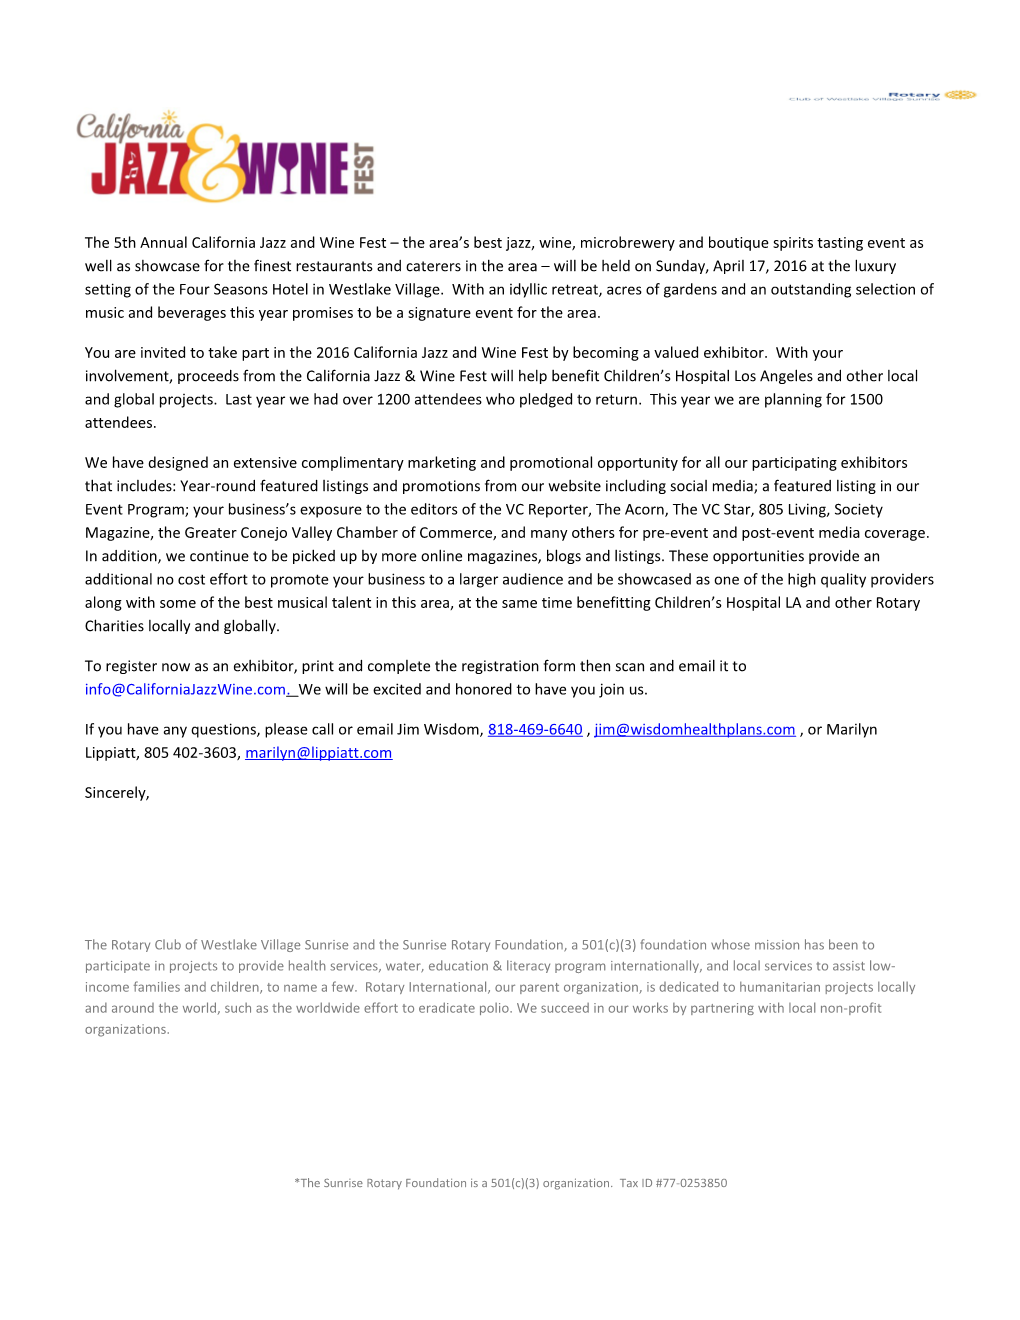 You Are Invited to Take Part in the 2016 California Jazz and Wine Fest by Becoming a Valued